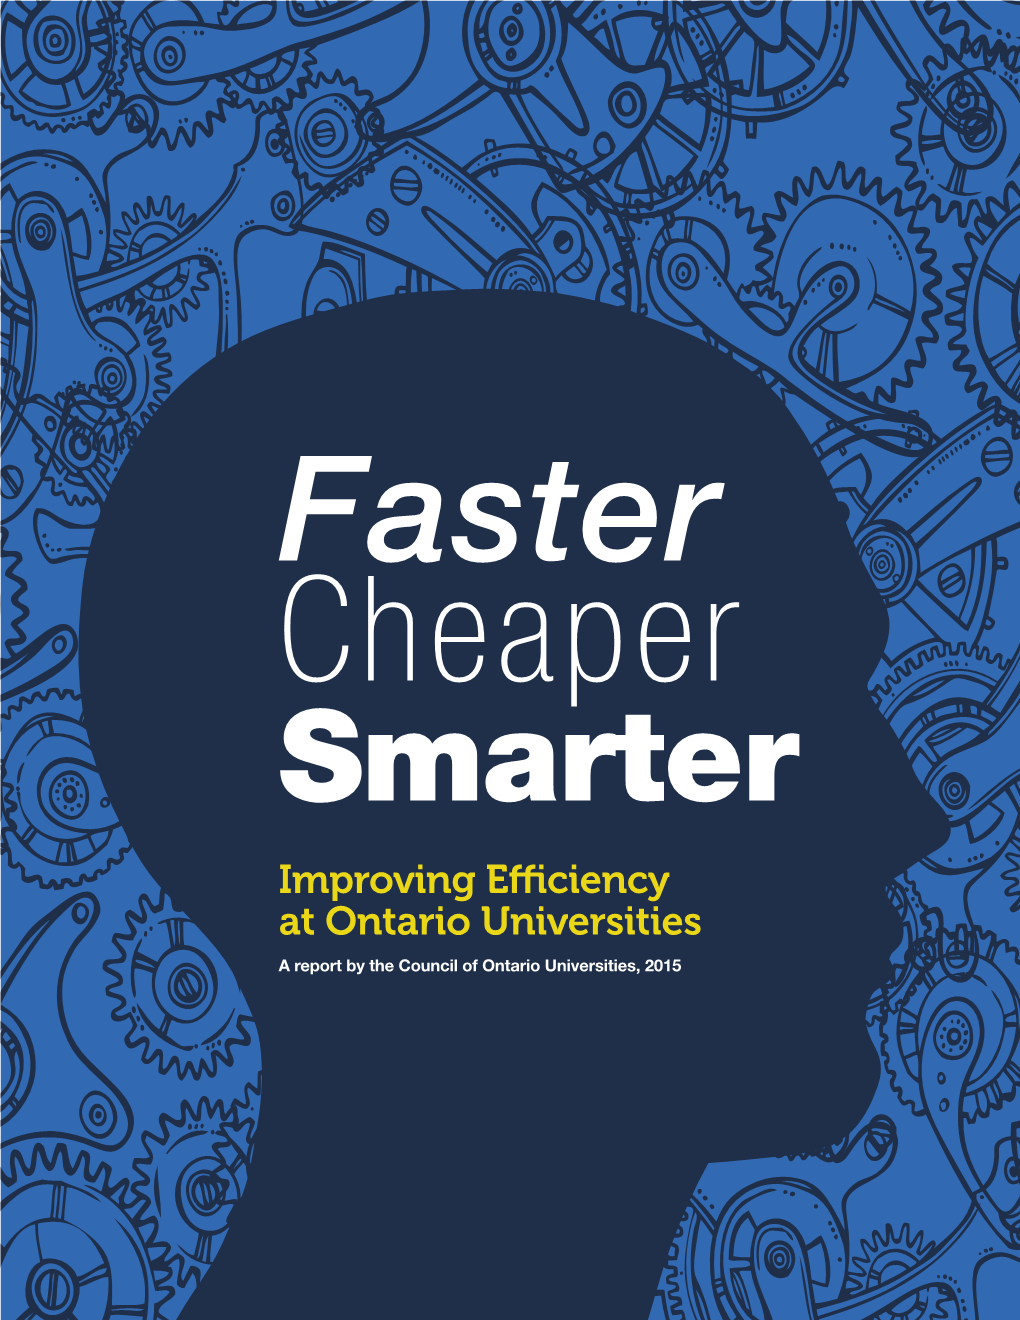 Faster, Cheaper, Smarter: Improving Efficiency at Ontario Universities